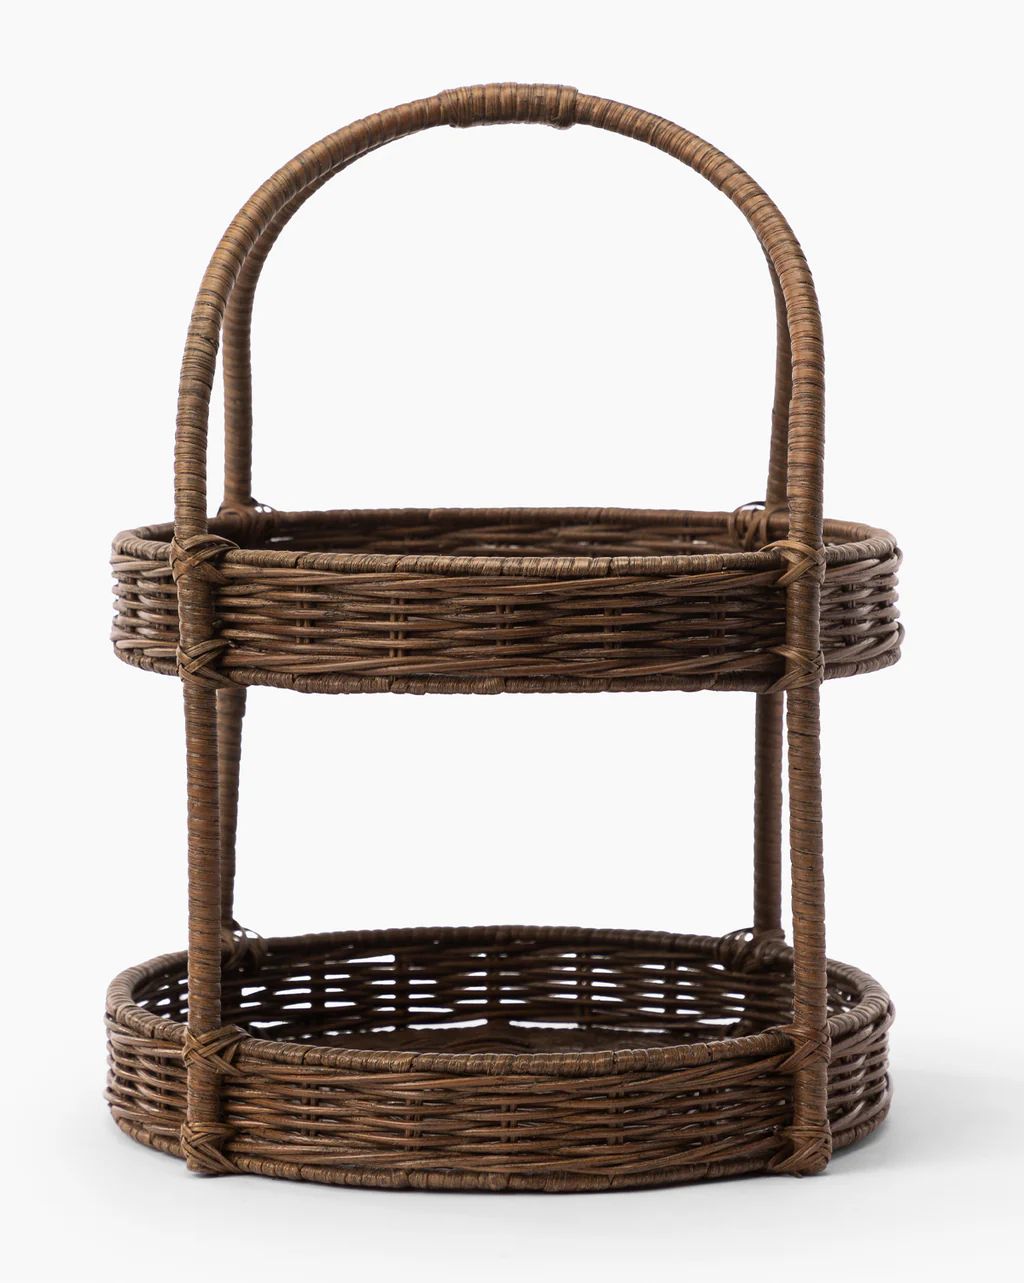 Aneesa Two-Tiered Wicker Tray | McGee & Co.